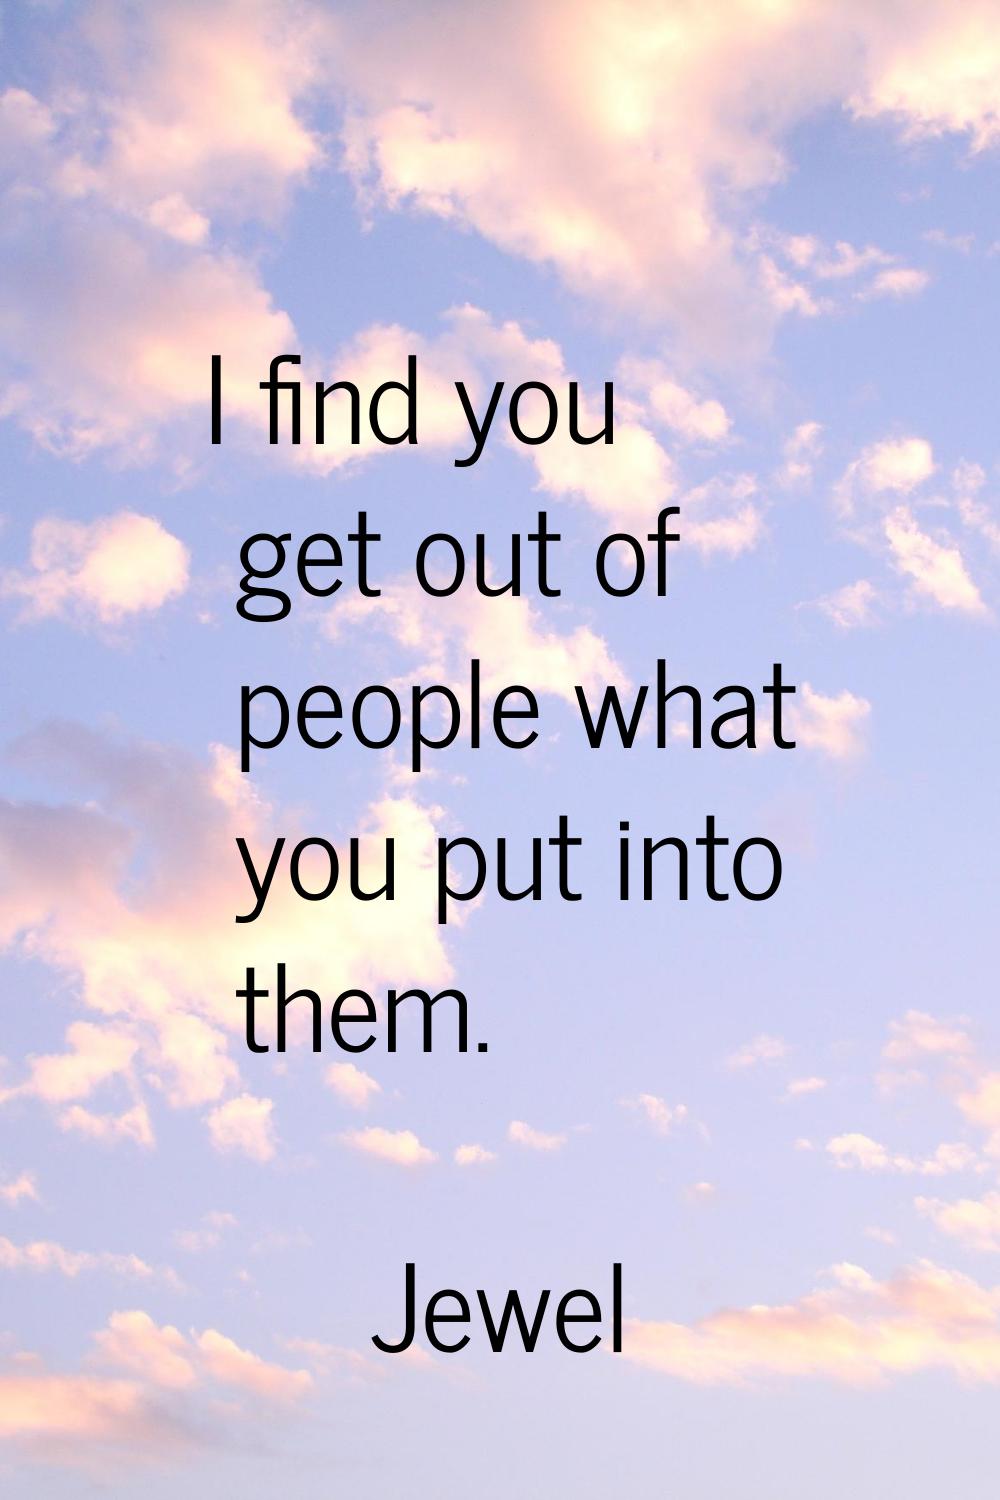 I find you get out of people what you put into them.